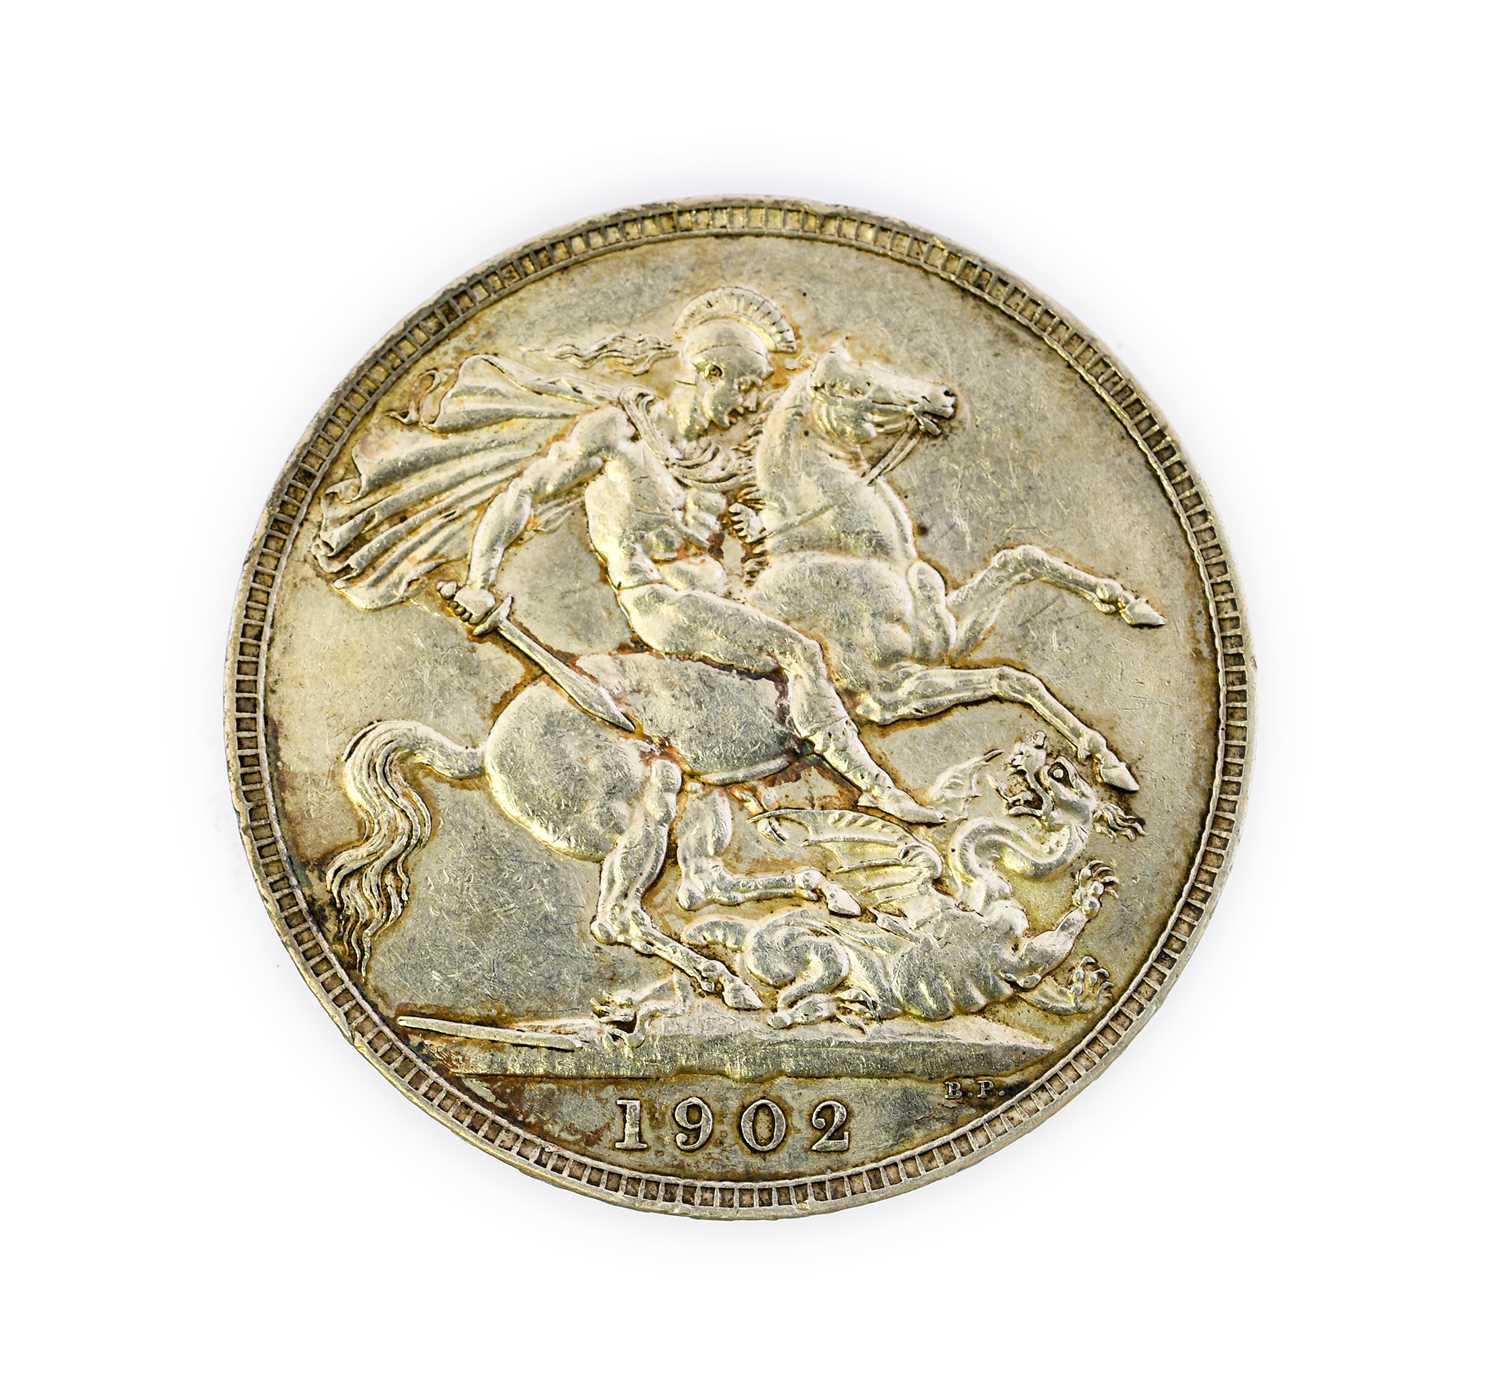 Edward VII, Crown 1902, numerous hairlines both sides, trivial contact marks , lustrous AEF